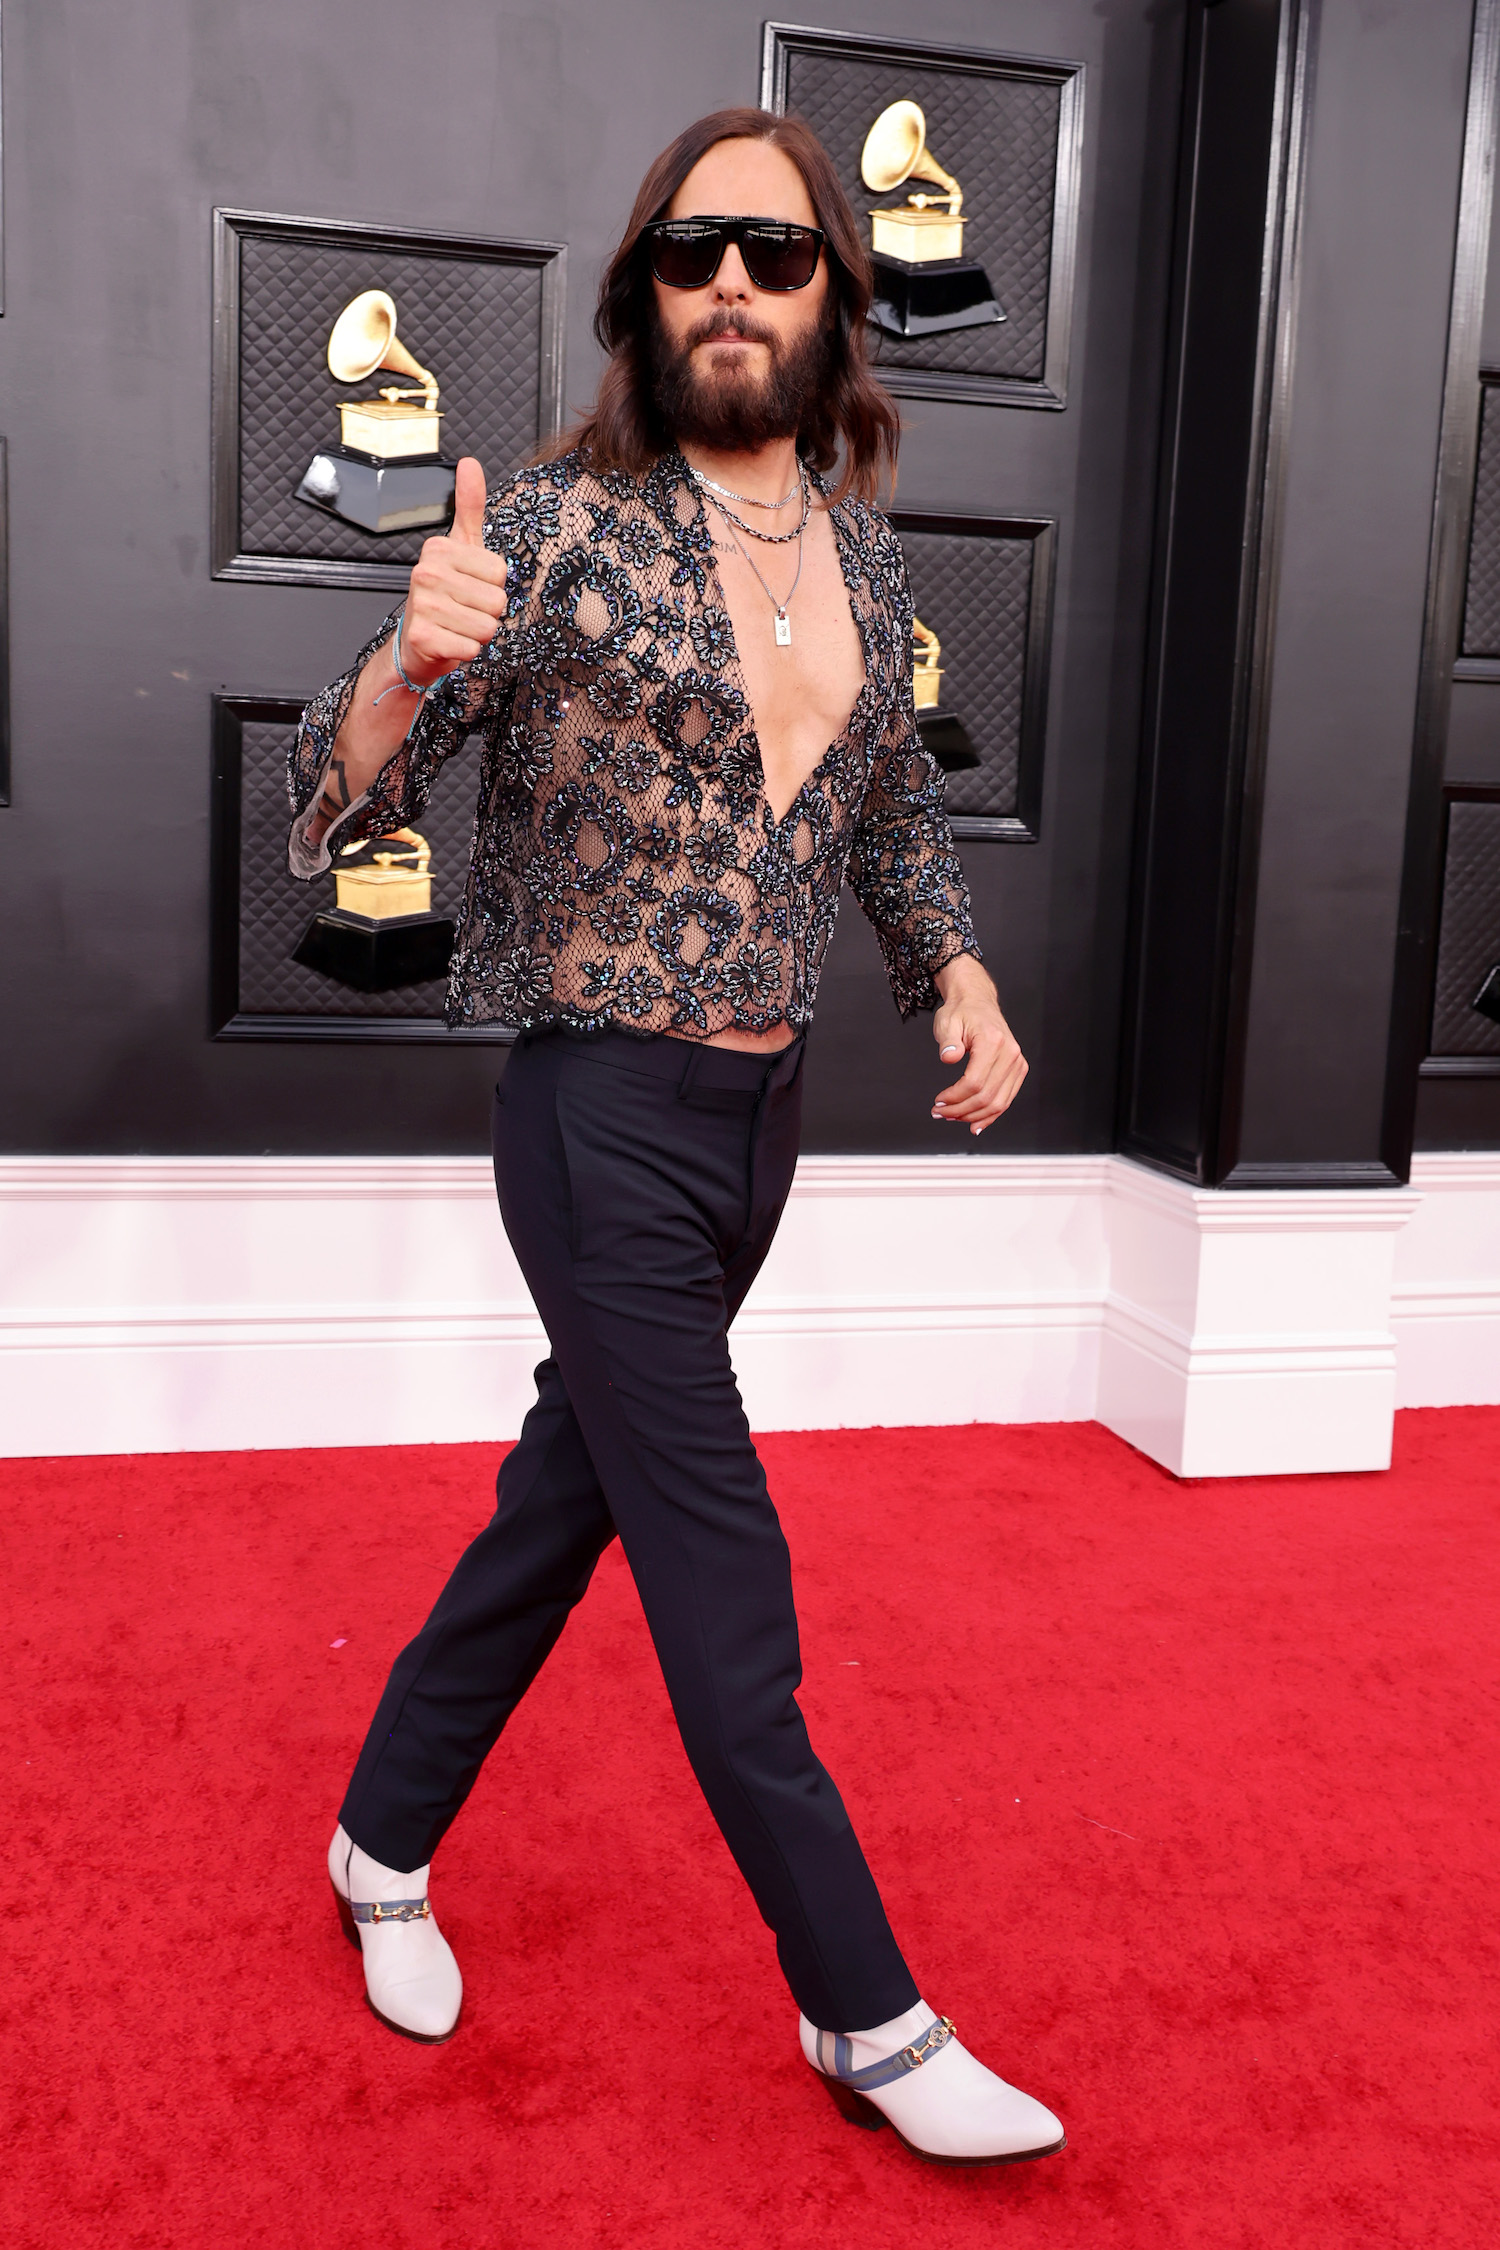 Jared Leto at the Grammys 2022